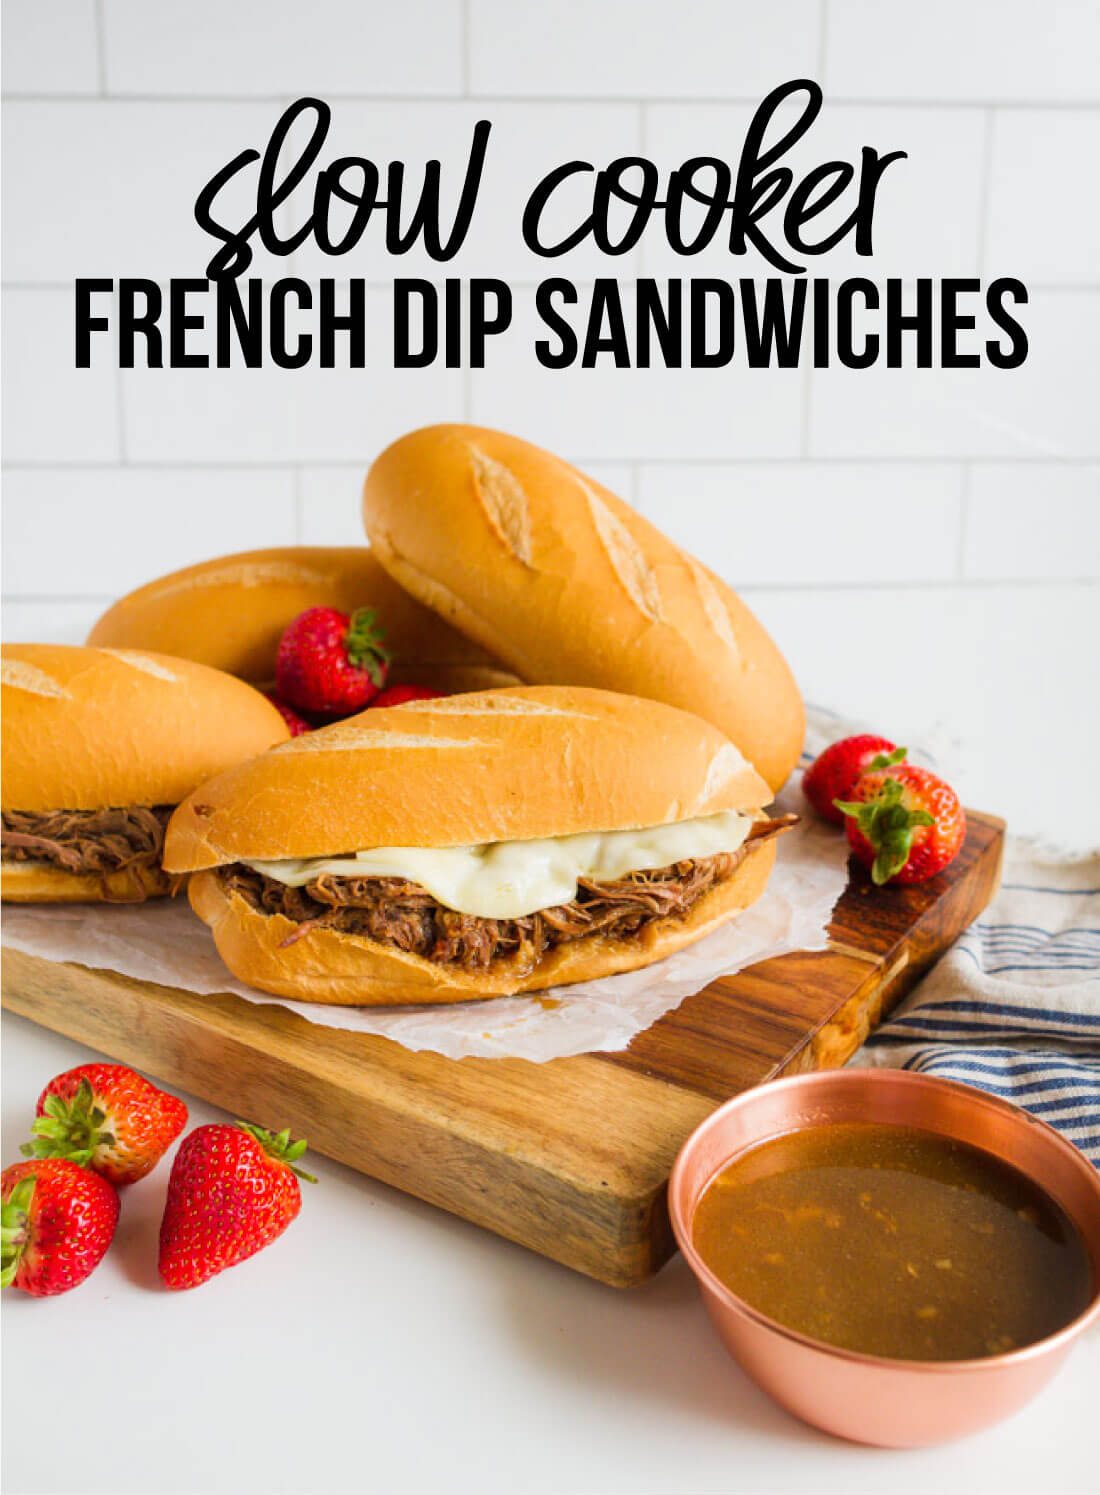 French Dip sandwiches with au jus sauce is the perfect comfort food that can be made in the slow cooker.